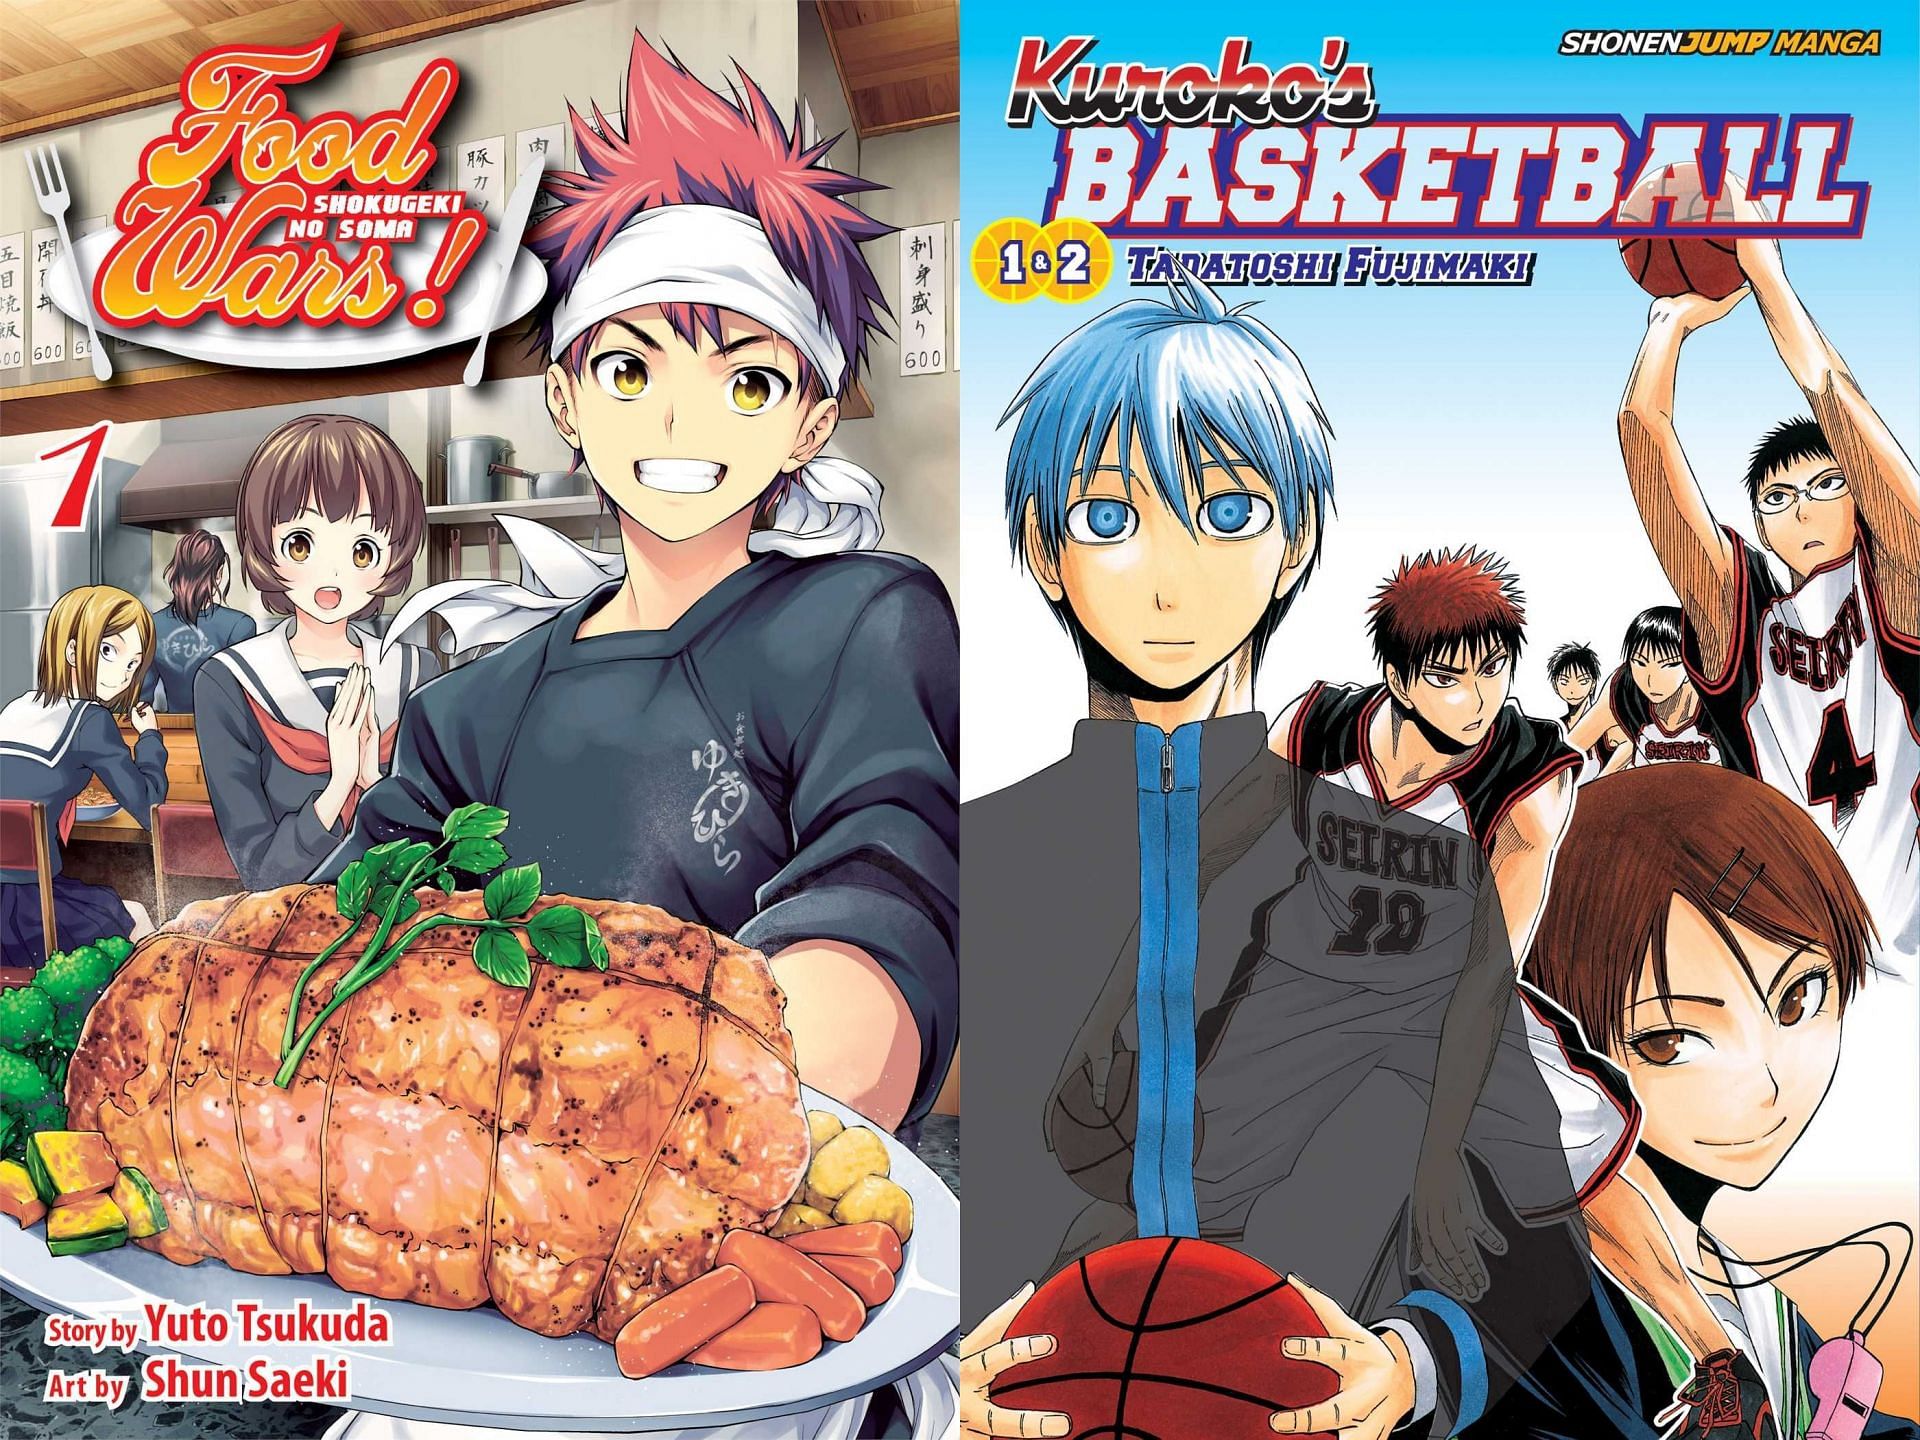 7 FoodThemed Anime Shows That Will Make You Want to Channel Your Inner Chef